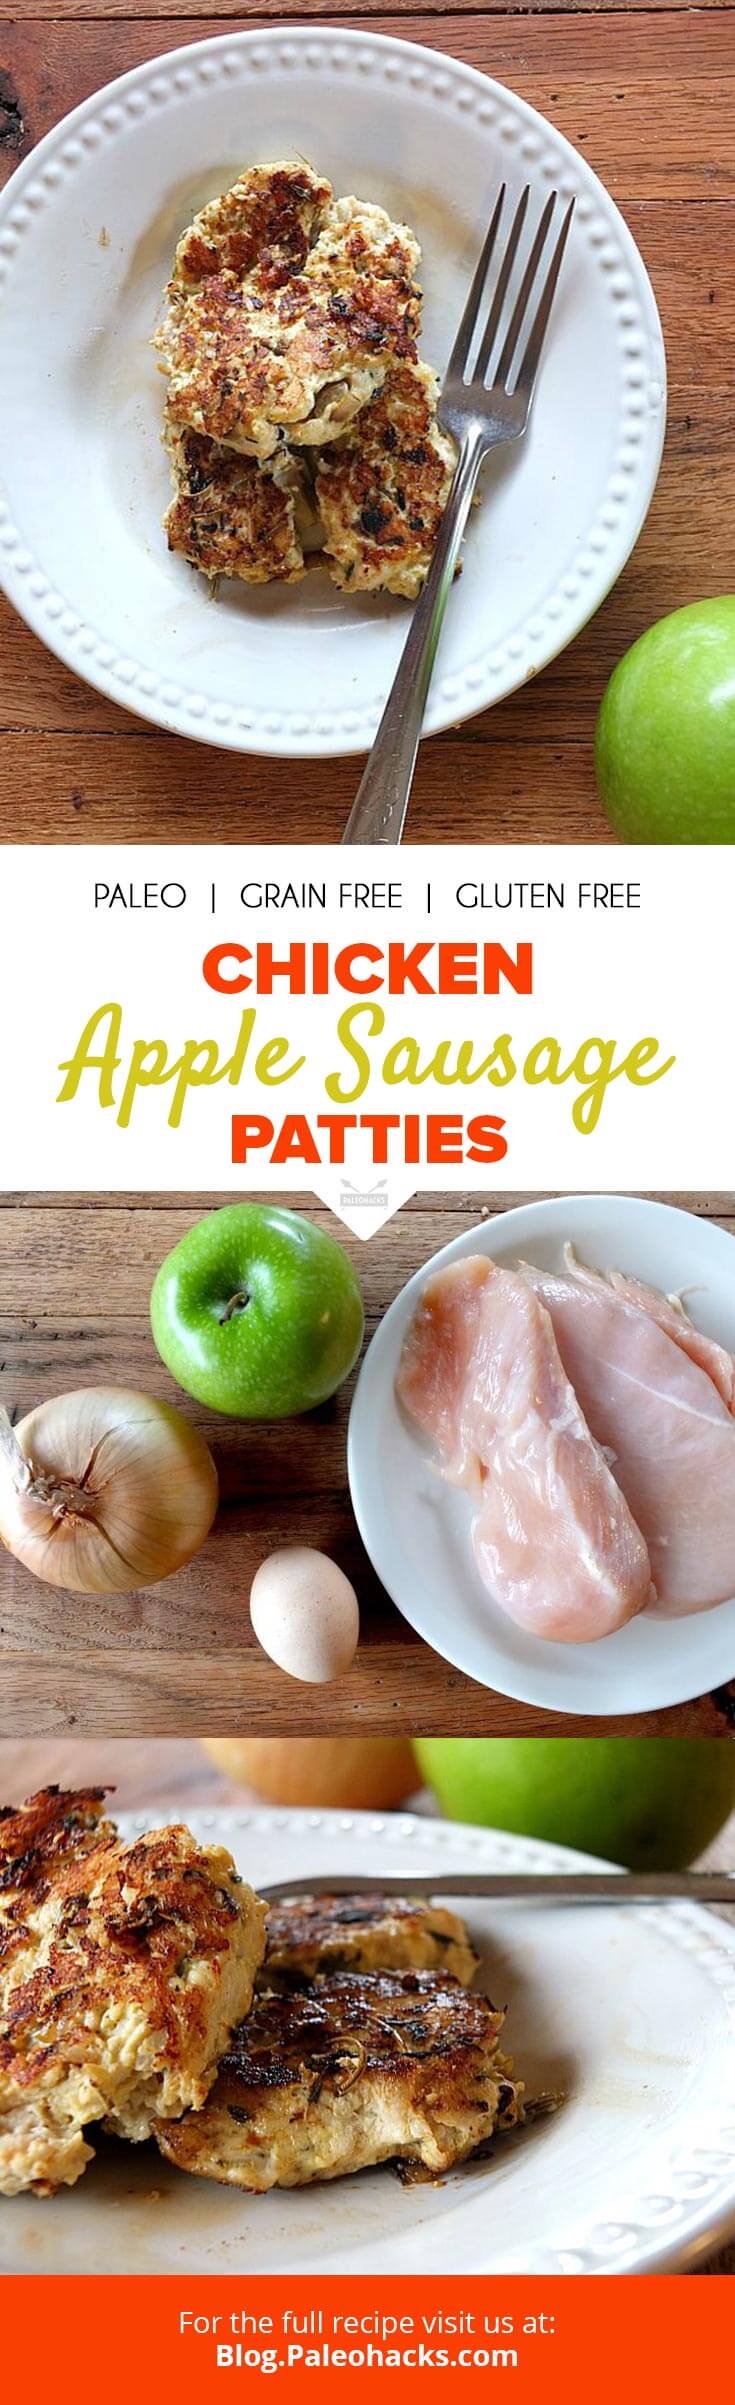 Want to boost your morning meal with protein? Try these chicken apple sausage patties bursting with warm, sweet flavor!